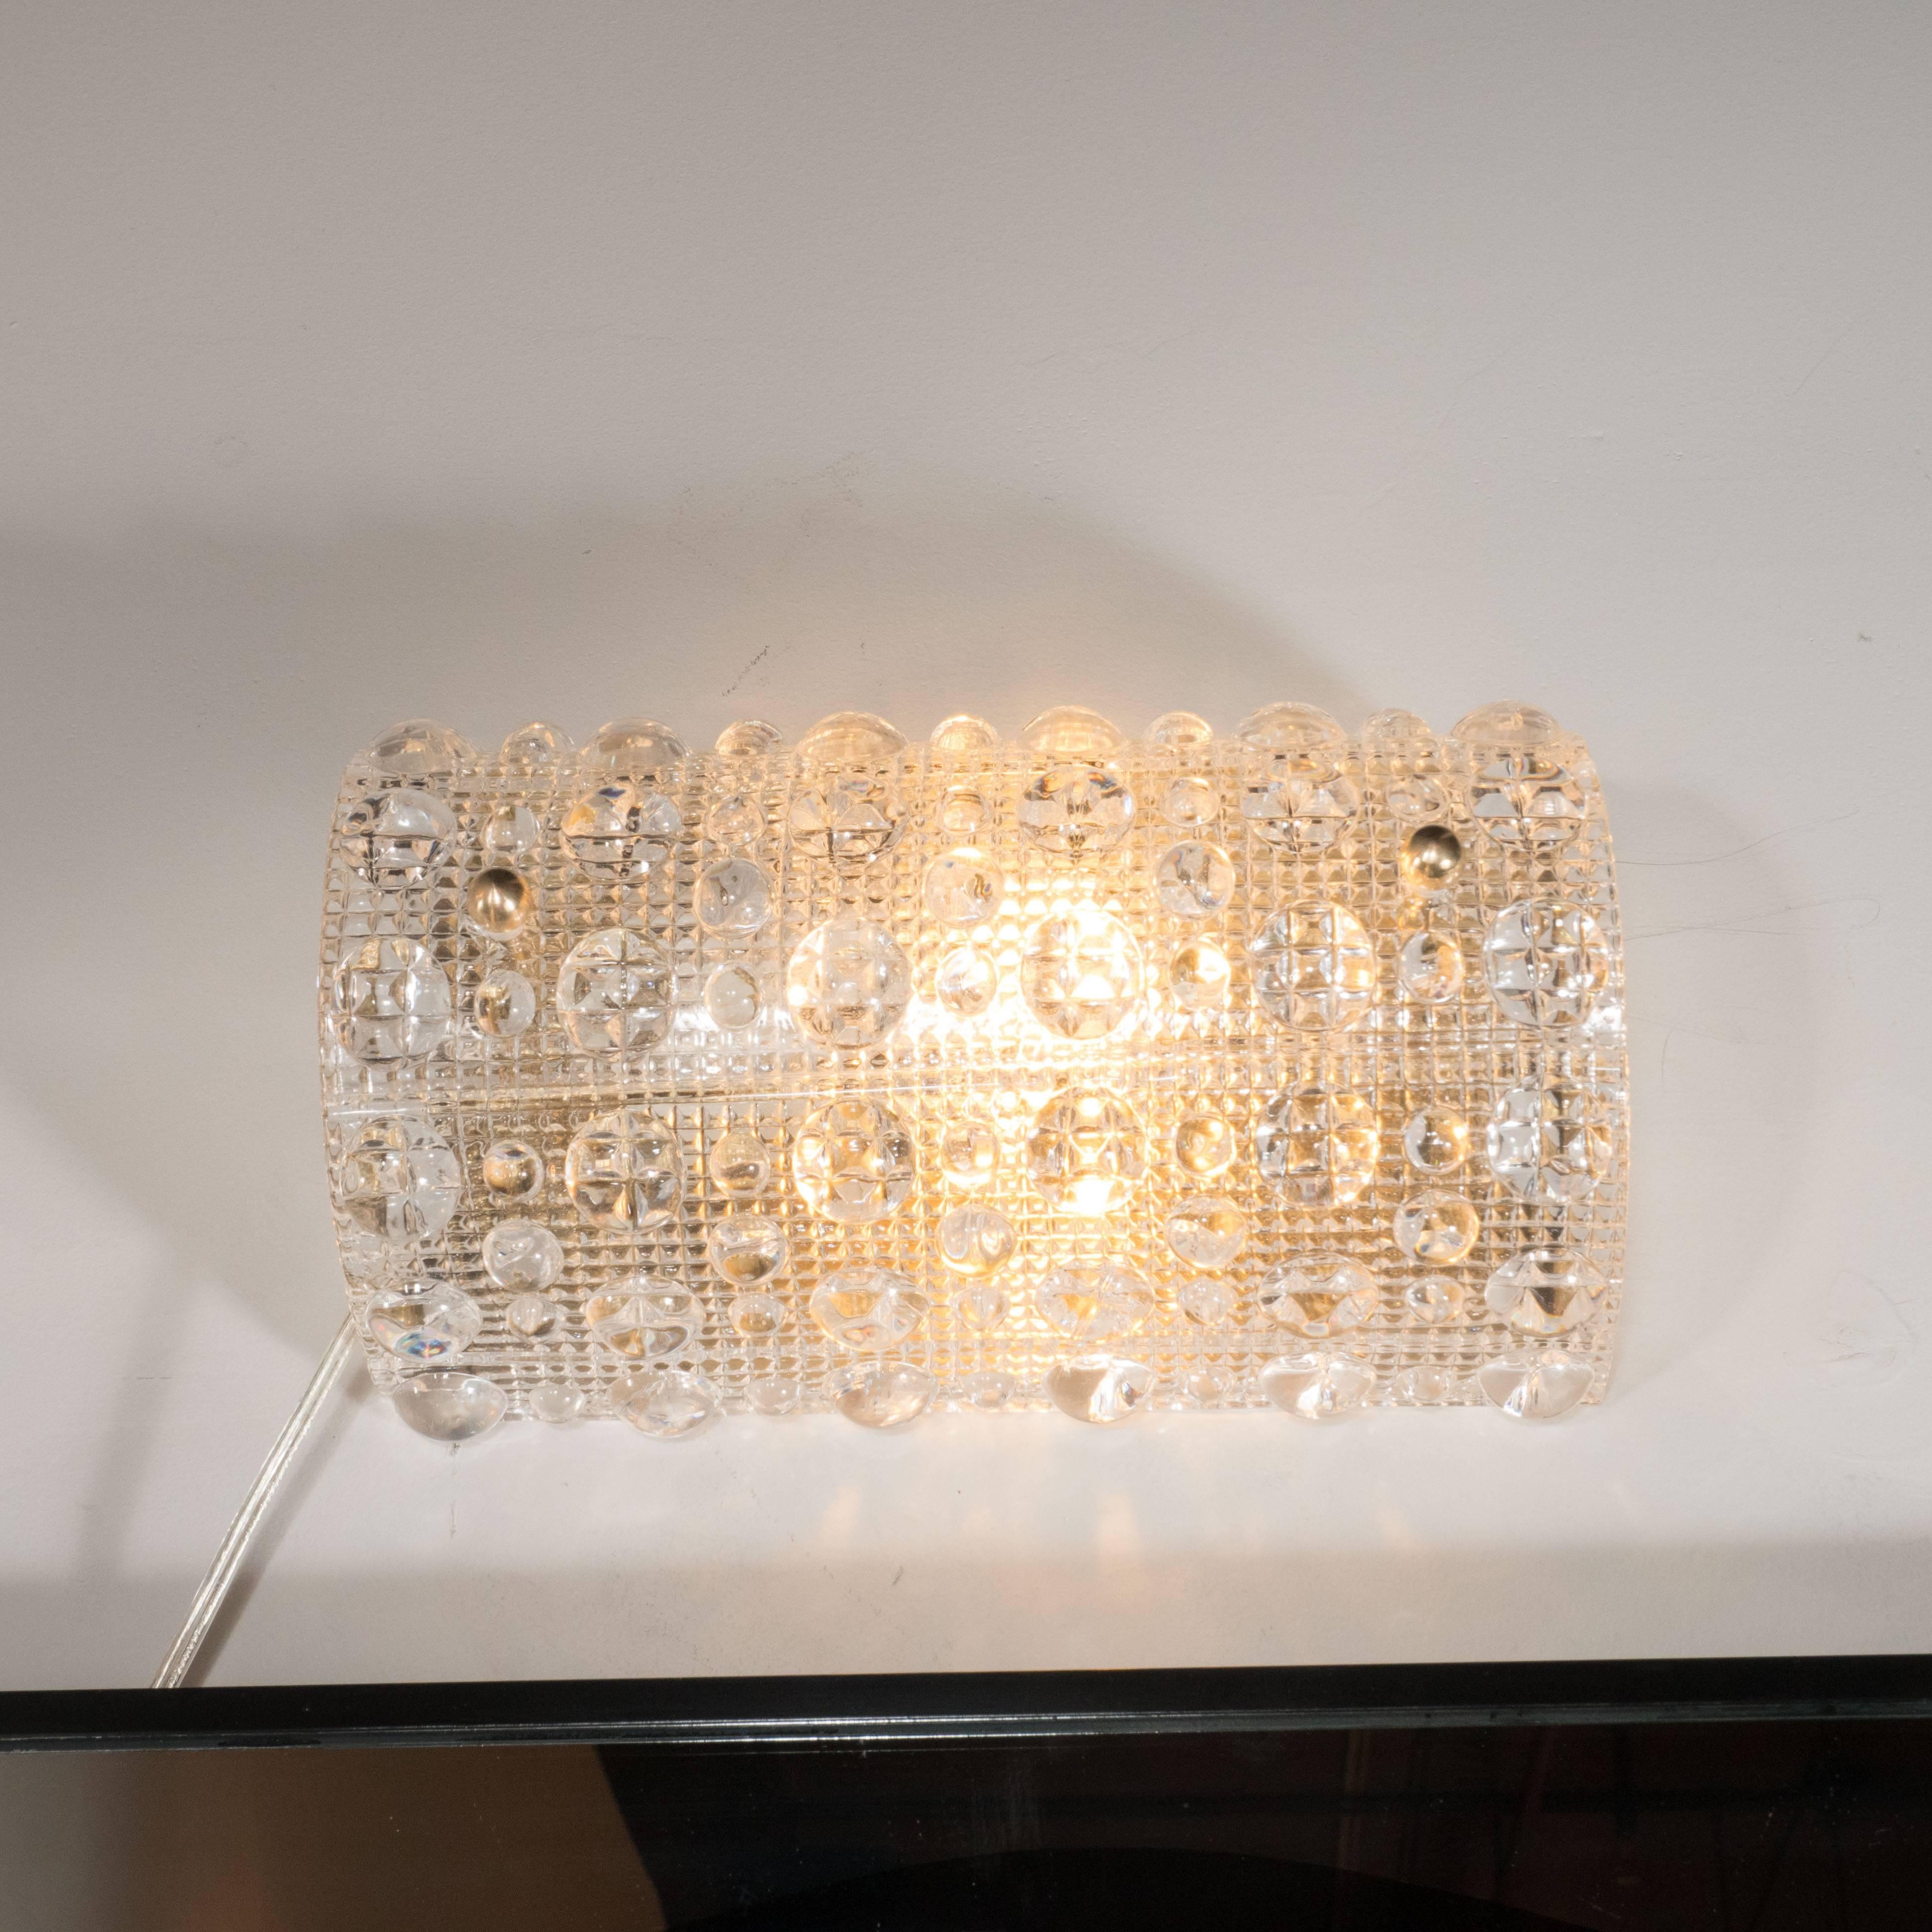 This Mid-Century Modernist vanity light by Carl Fagerlund for Orrefors features an elegant cross-hatch detail in a sculptural free-formed handblown textured glass shade mounted on brass fittings. This fixture holds (1) 100 watt Edison-base bulb. It